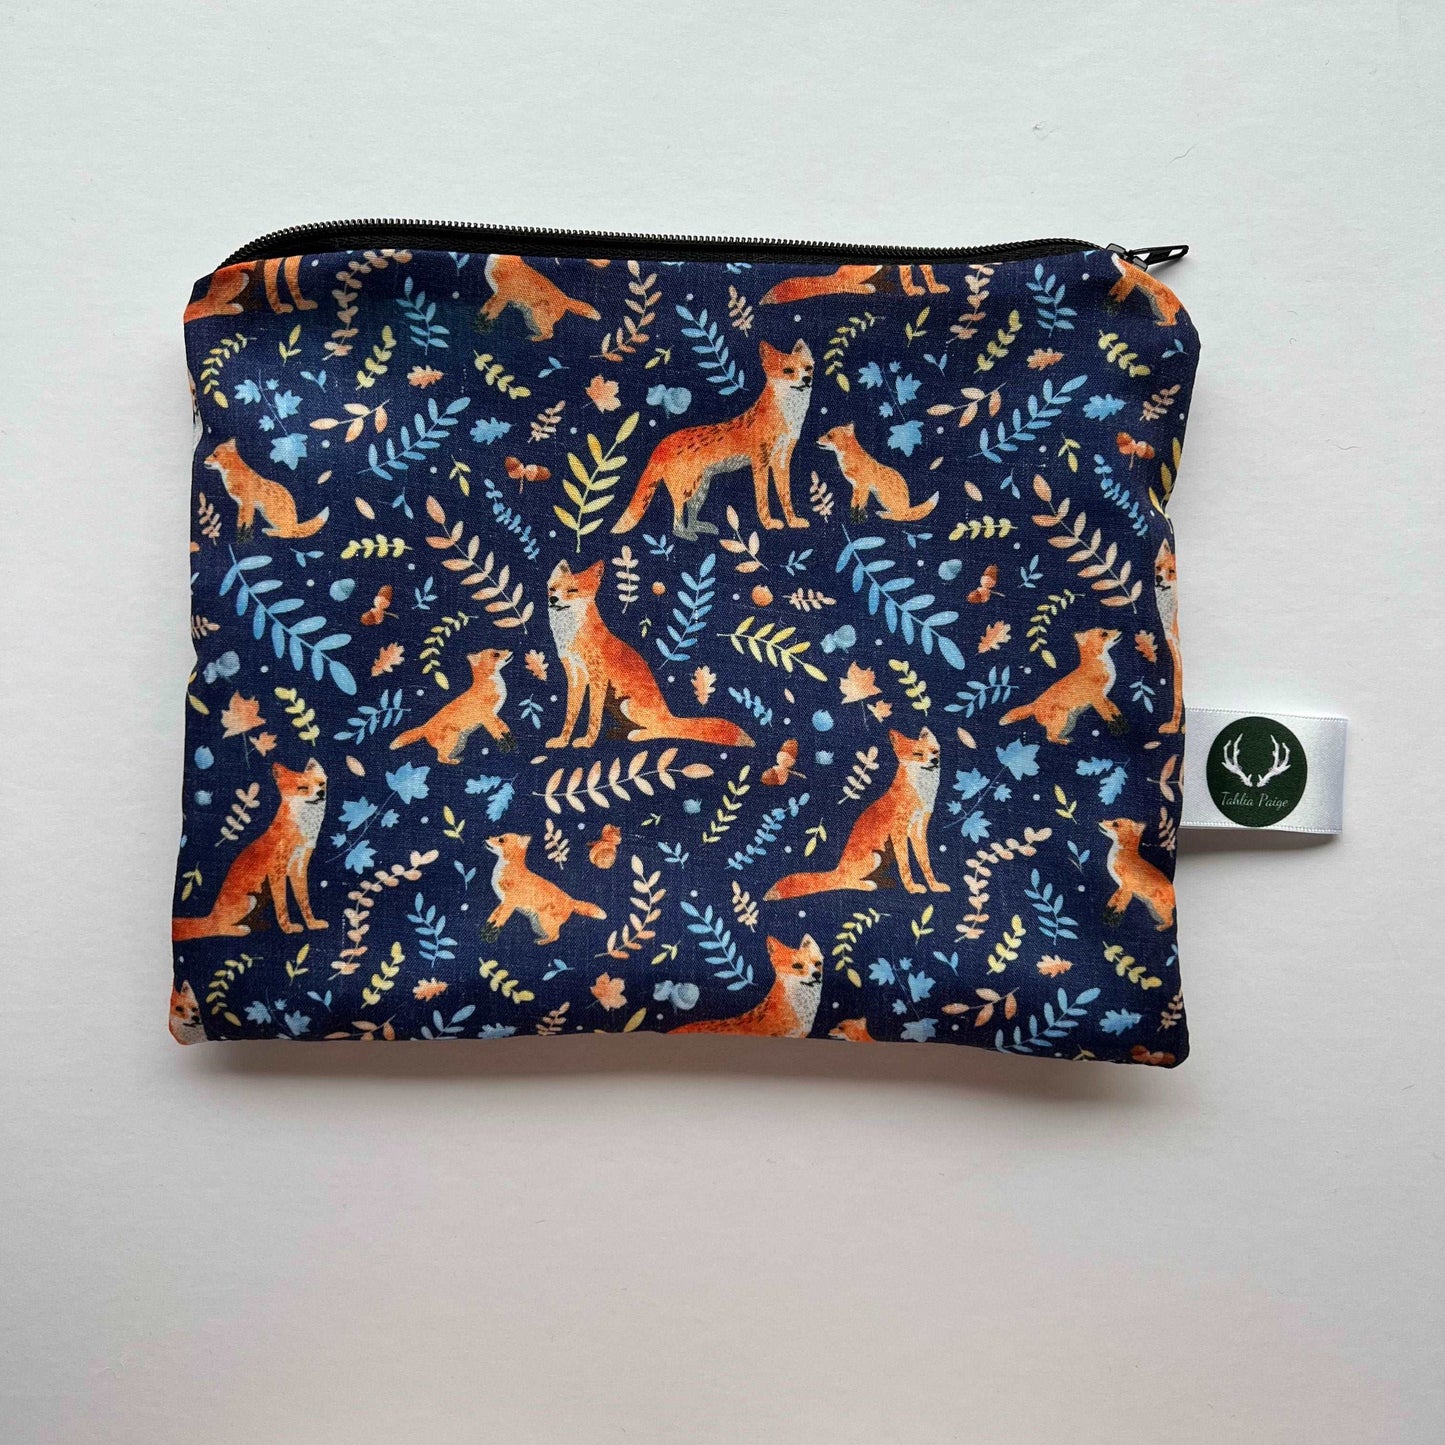 Cute fox pouch, perfect for storing essentials.